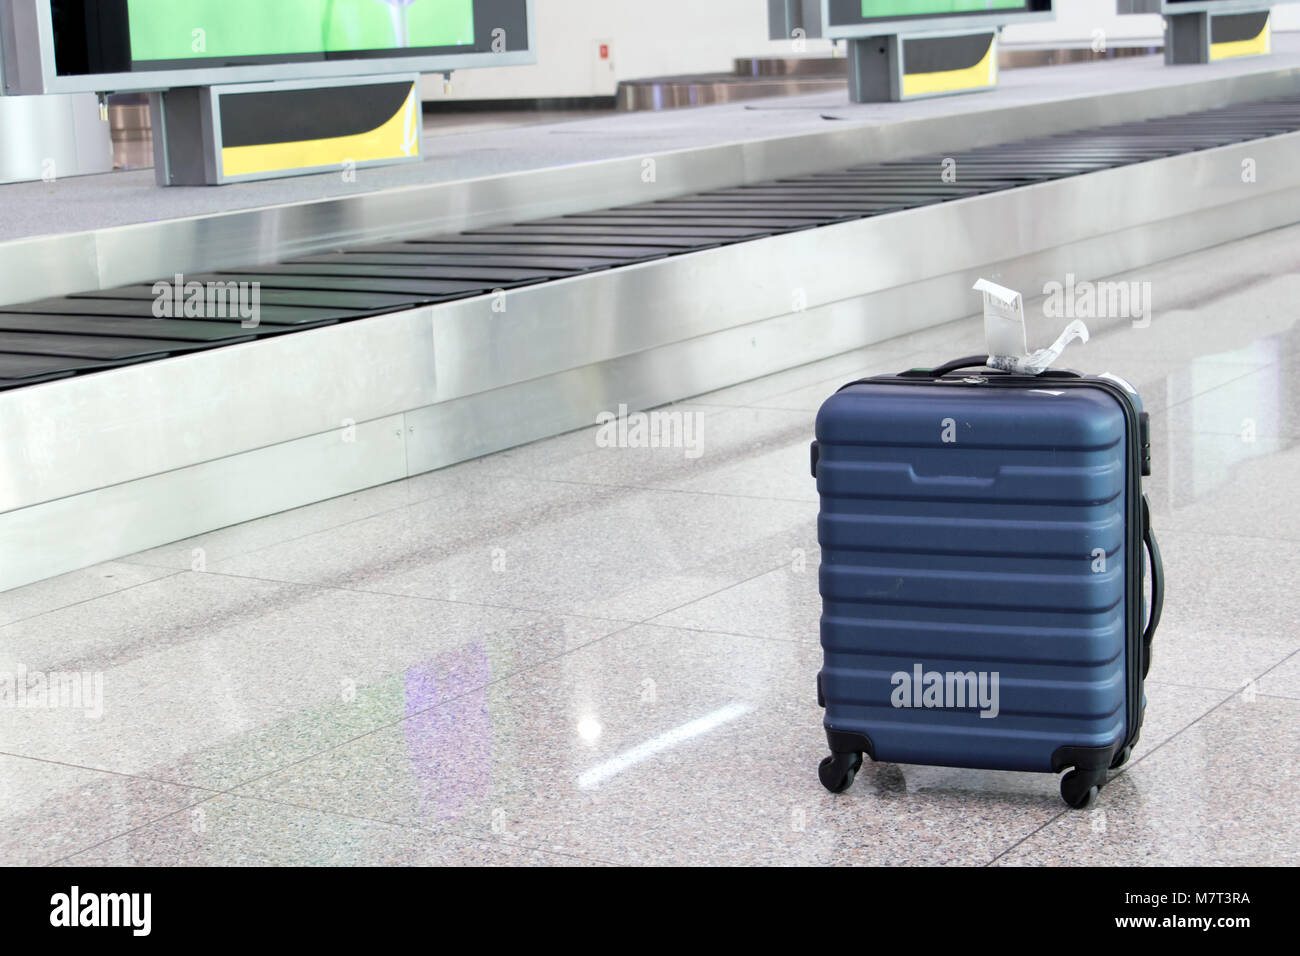 A forgotten lost suitcase in the airport hall. One case stands on wheels at the luggage transporter belt. Stock Photo